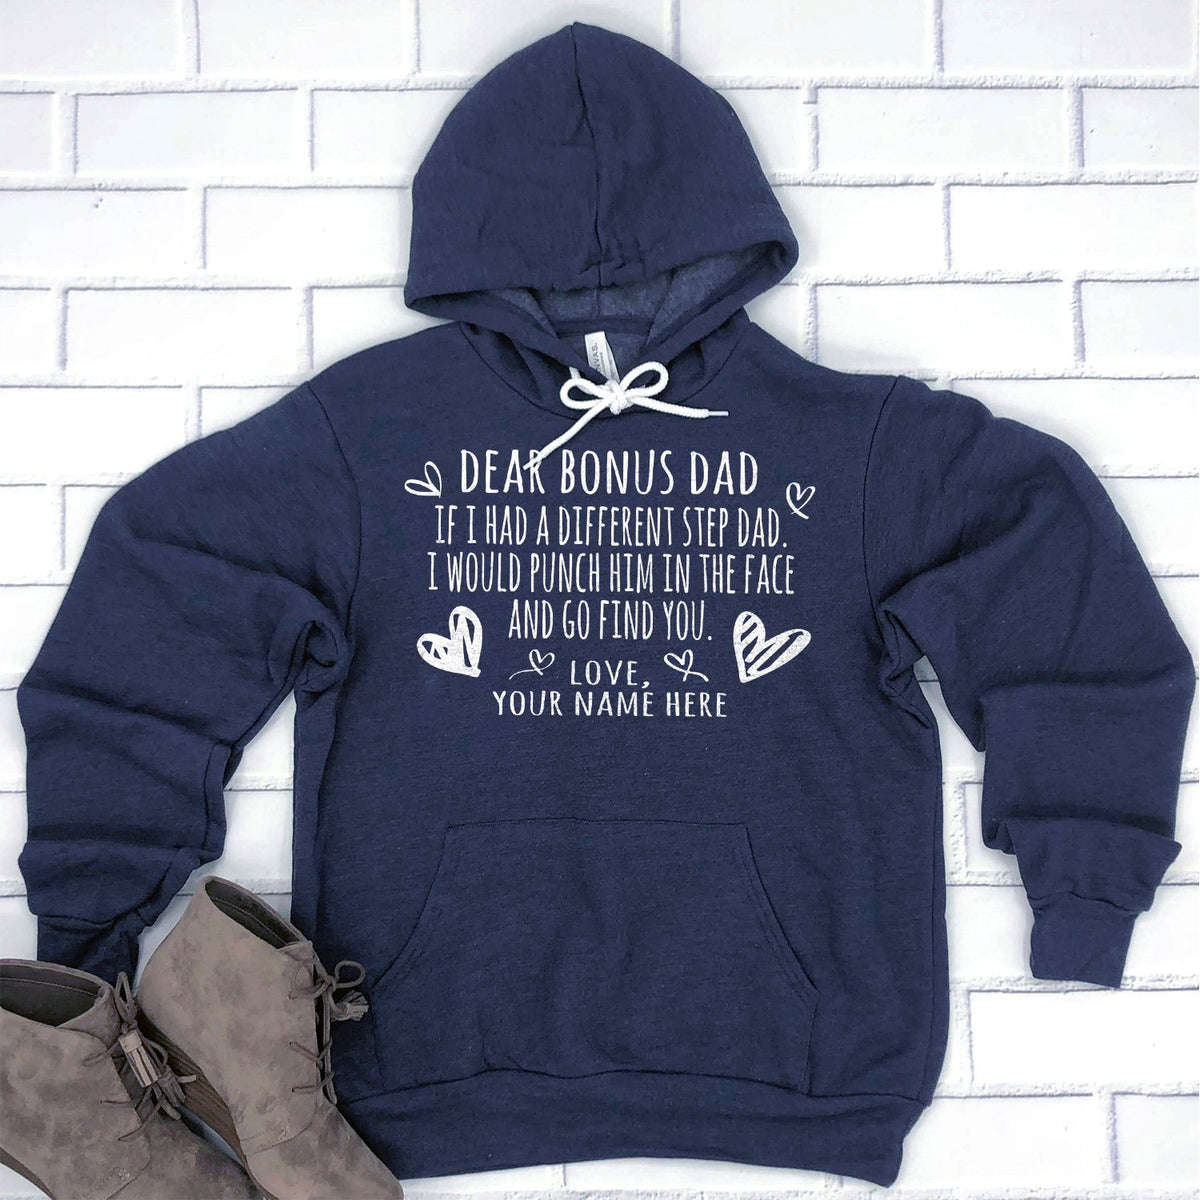 If I Had A Different Step Dad I Would Punch Him in The Face - Hoodie Sweatshirt